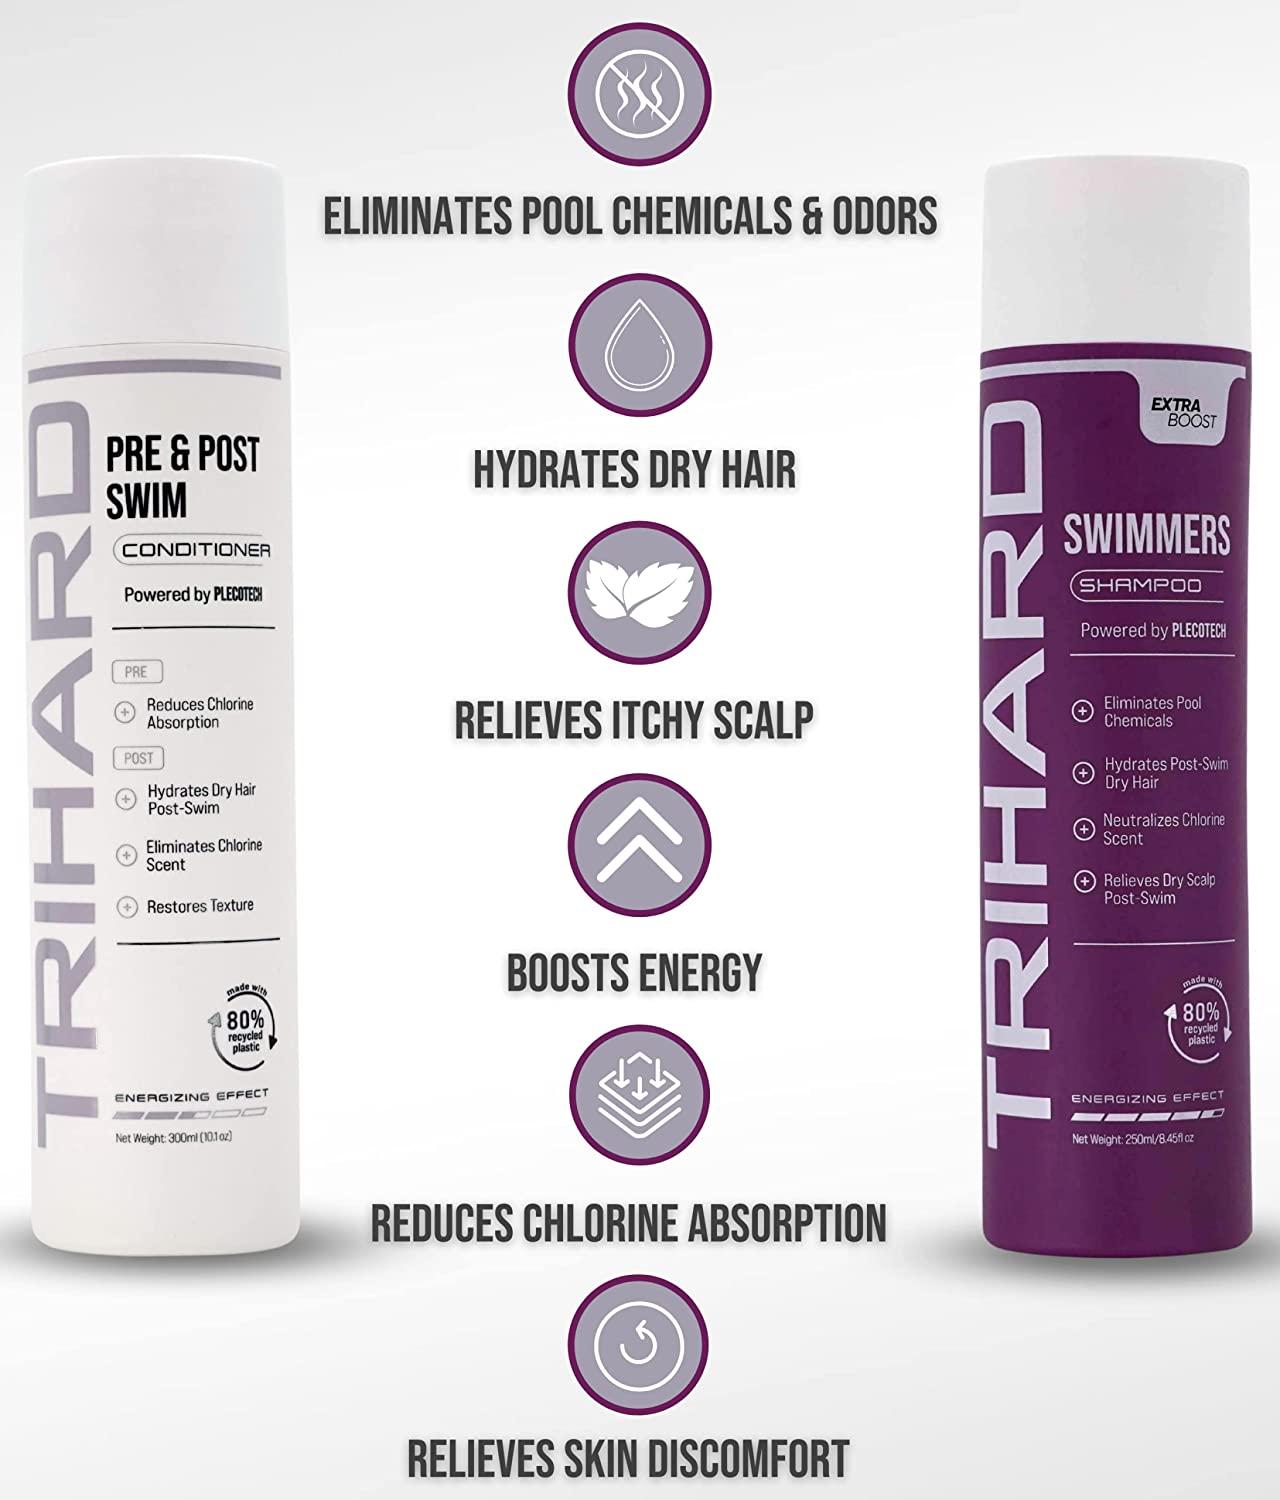 TRIHARD Swimmers Shampoo Extra Boost + Pre & Post Swim Conditioner |  Chlorine And Hair Solutions | Swimming Two-In-One Duo